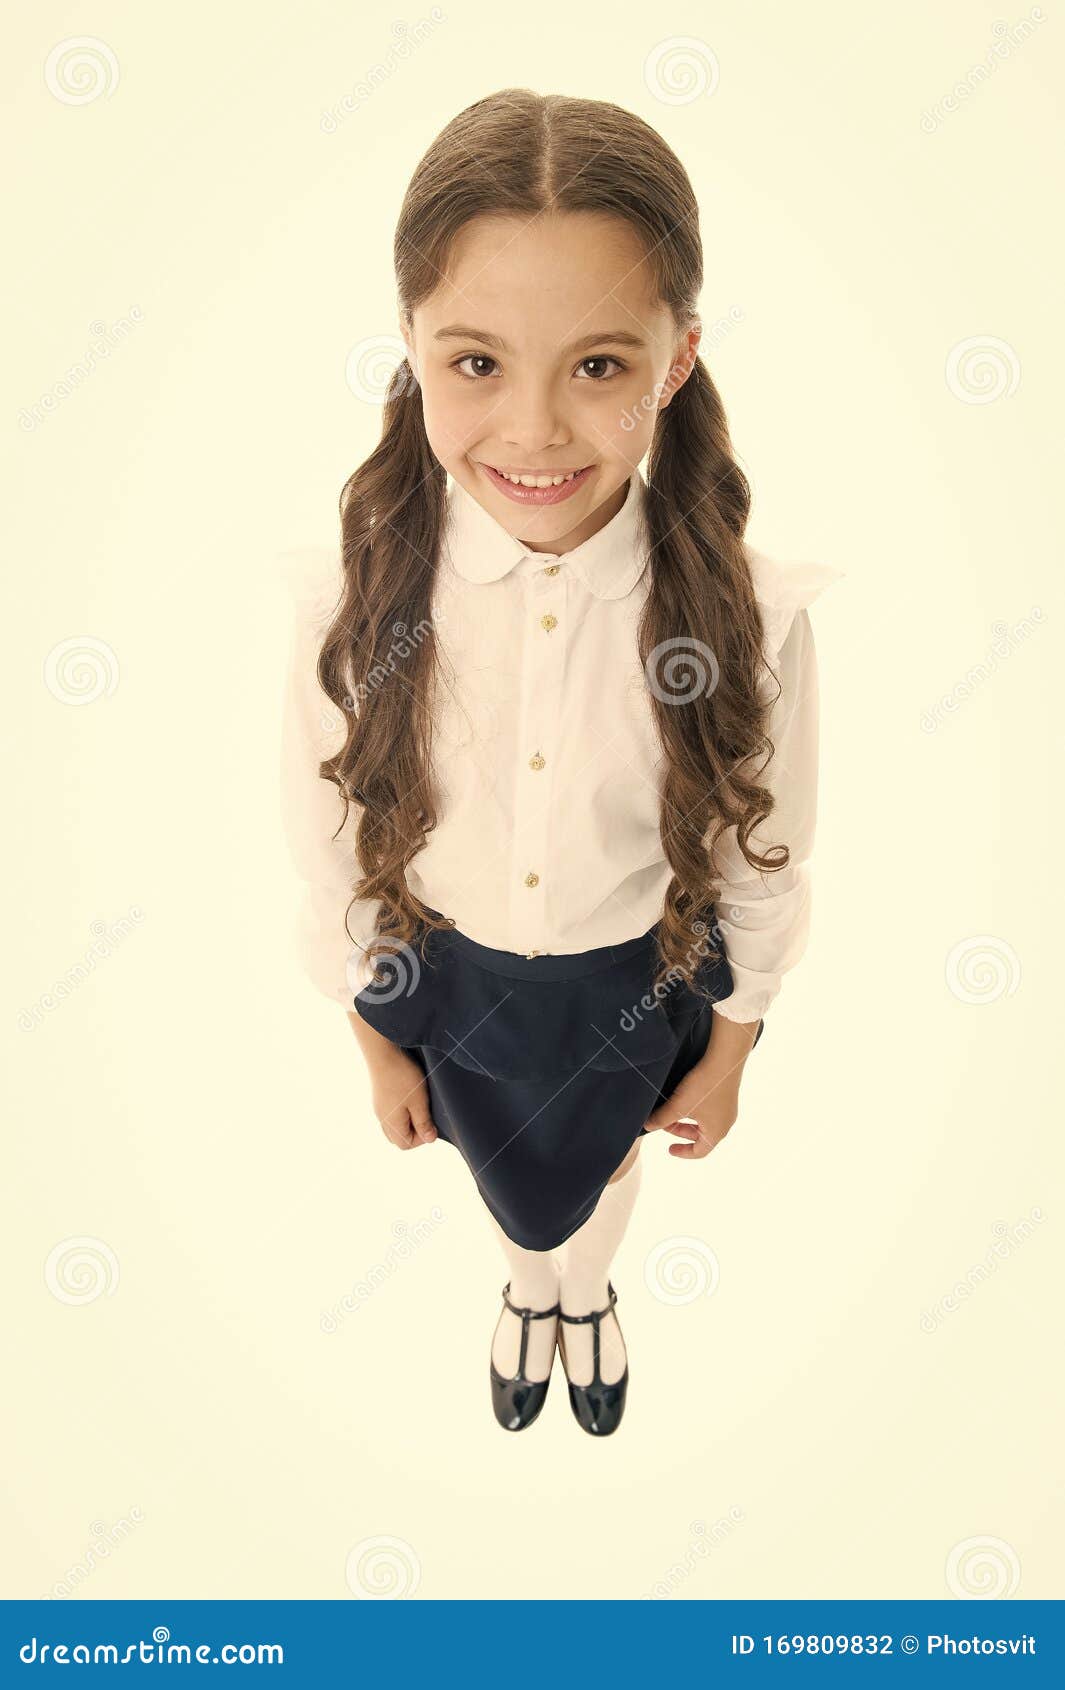 cheerful smile. girl cute pupil on white background. school uniform. back to school. student little kid adores school